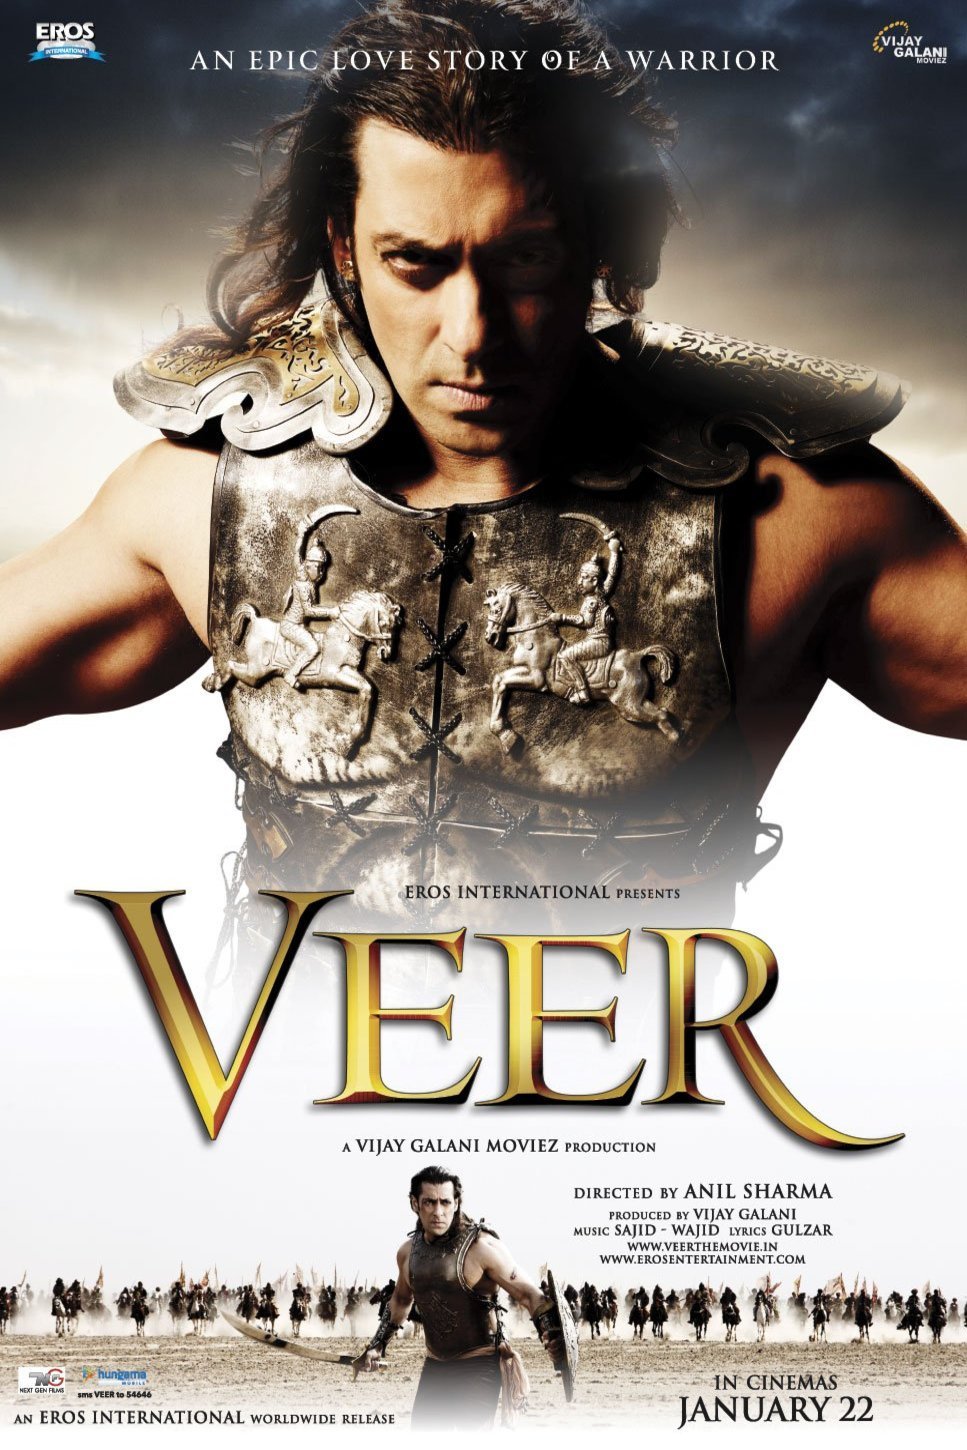 Hindi poster of the movie Veer